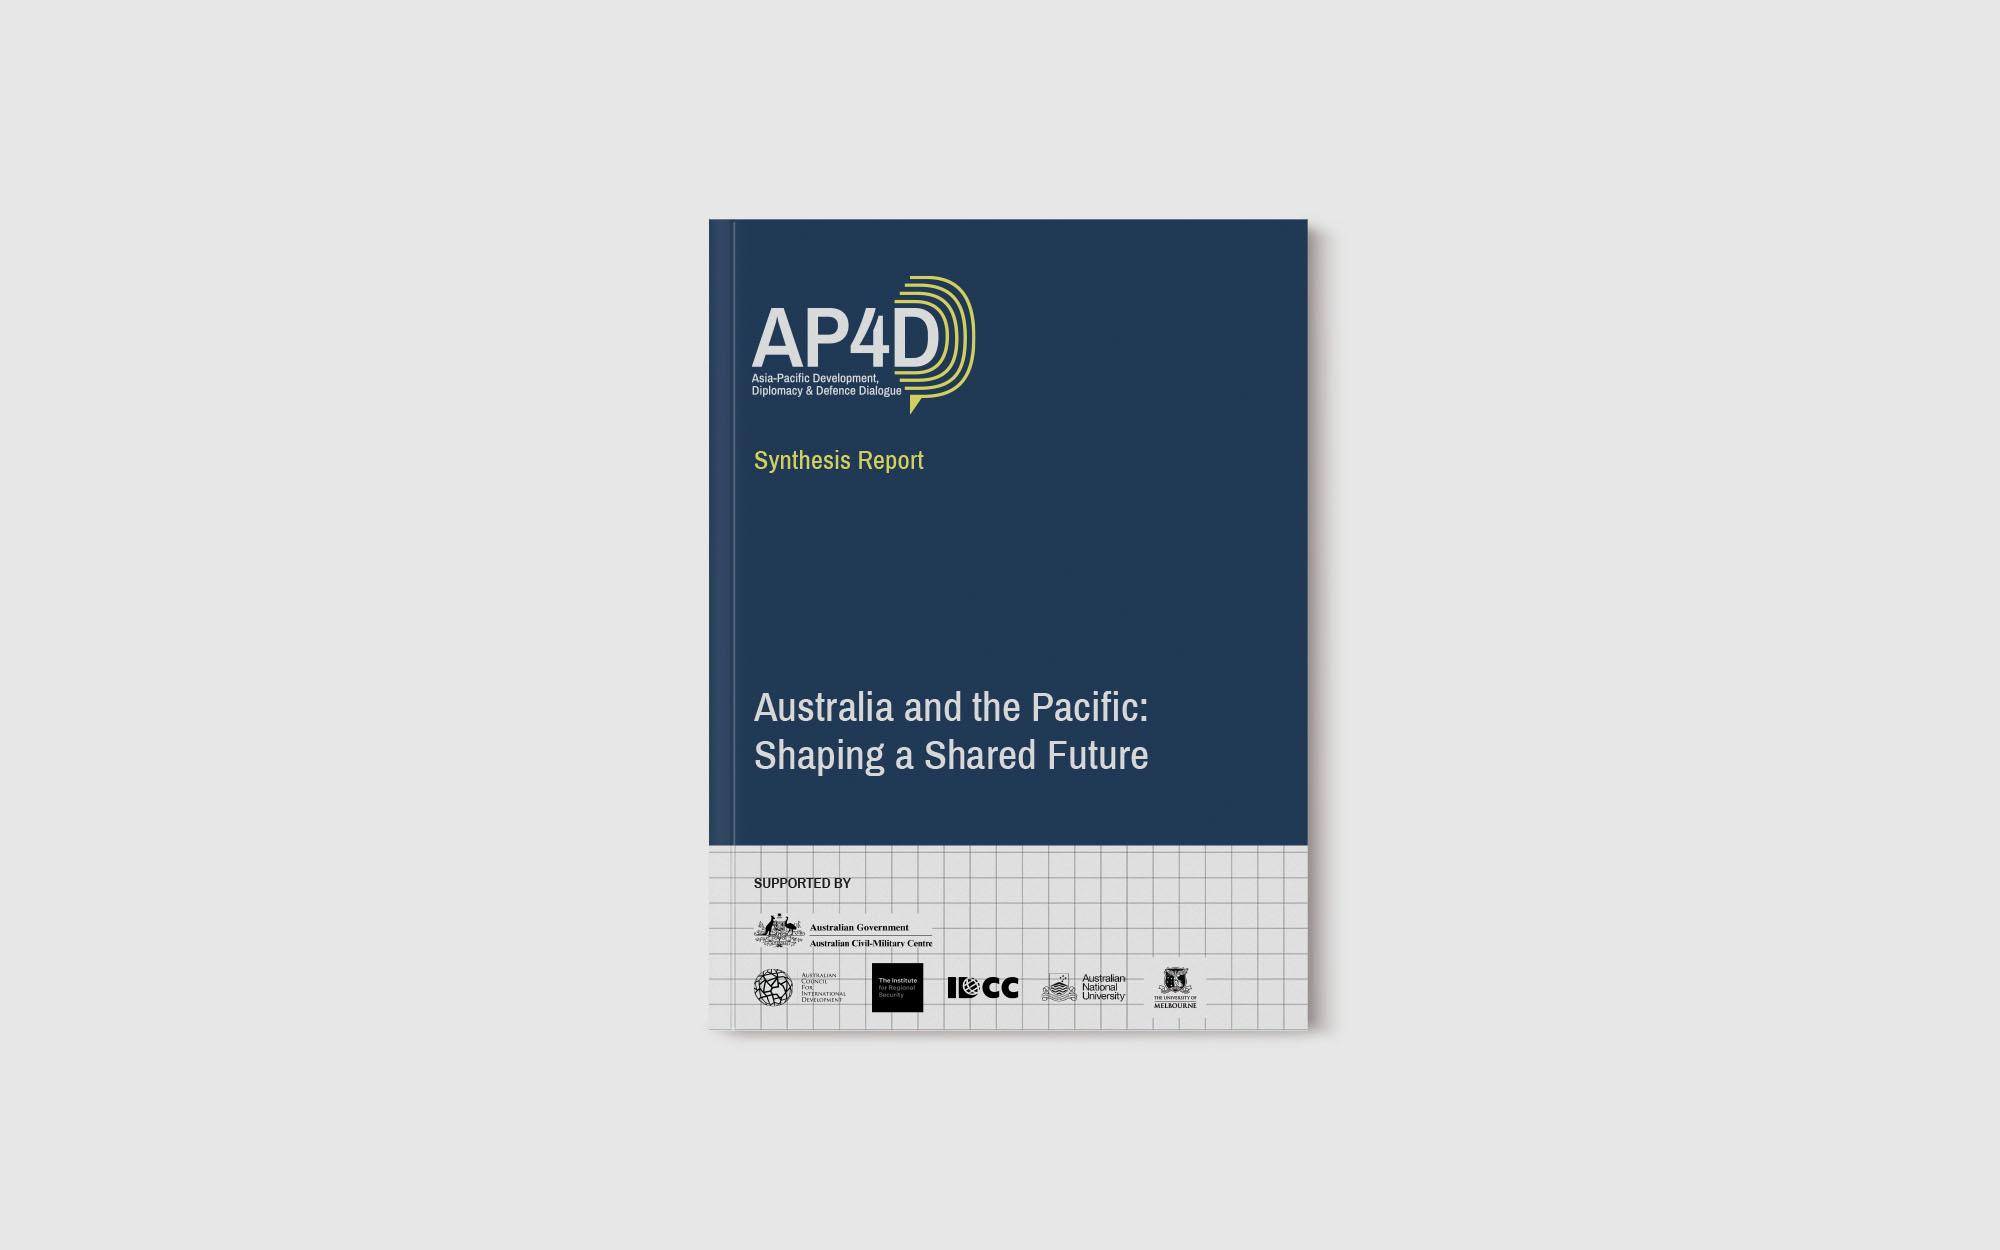 Australia and the Pacific: Shaping a Shared Future